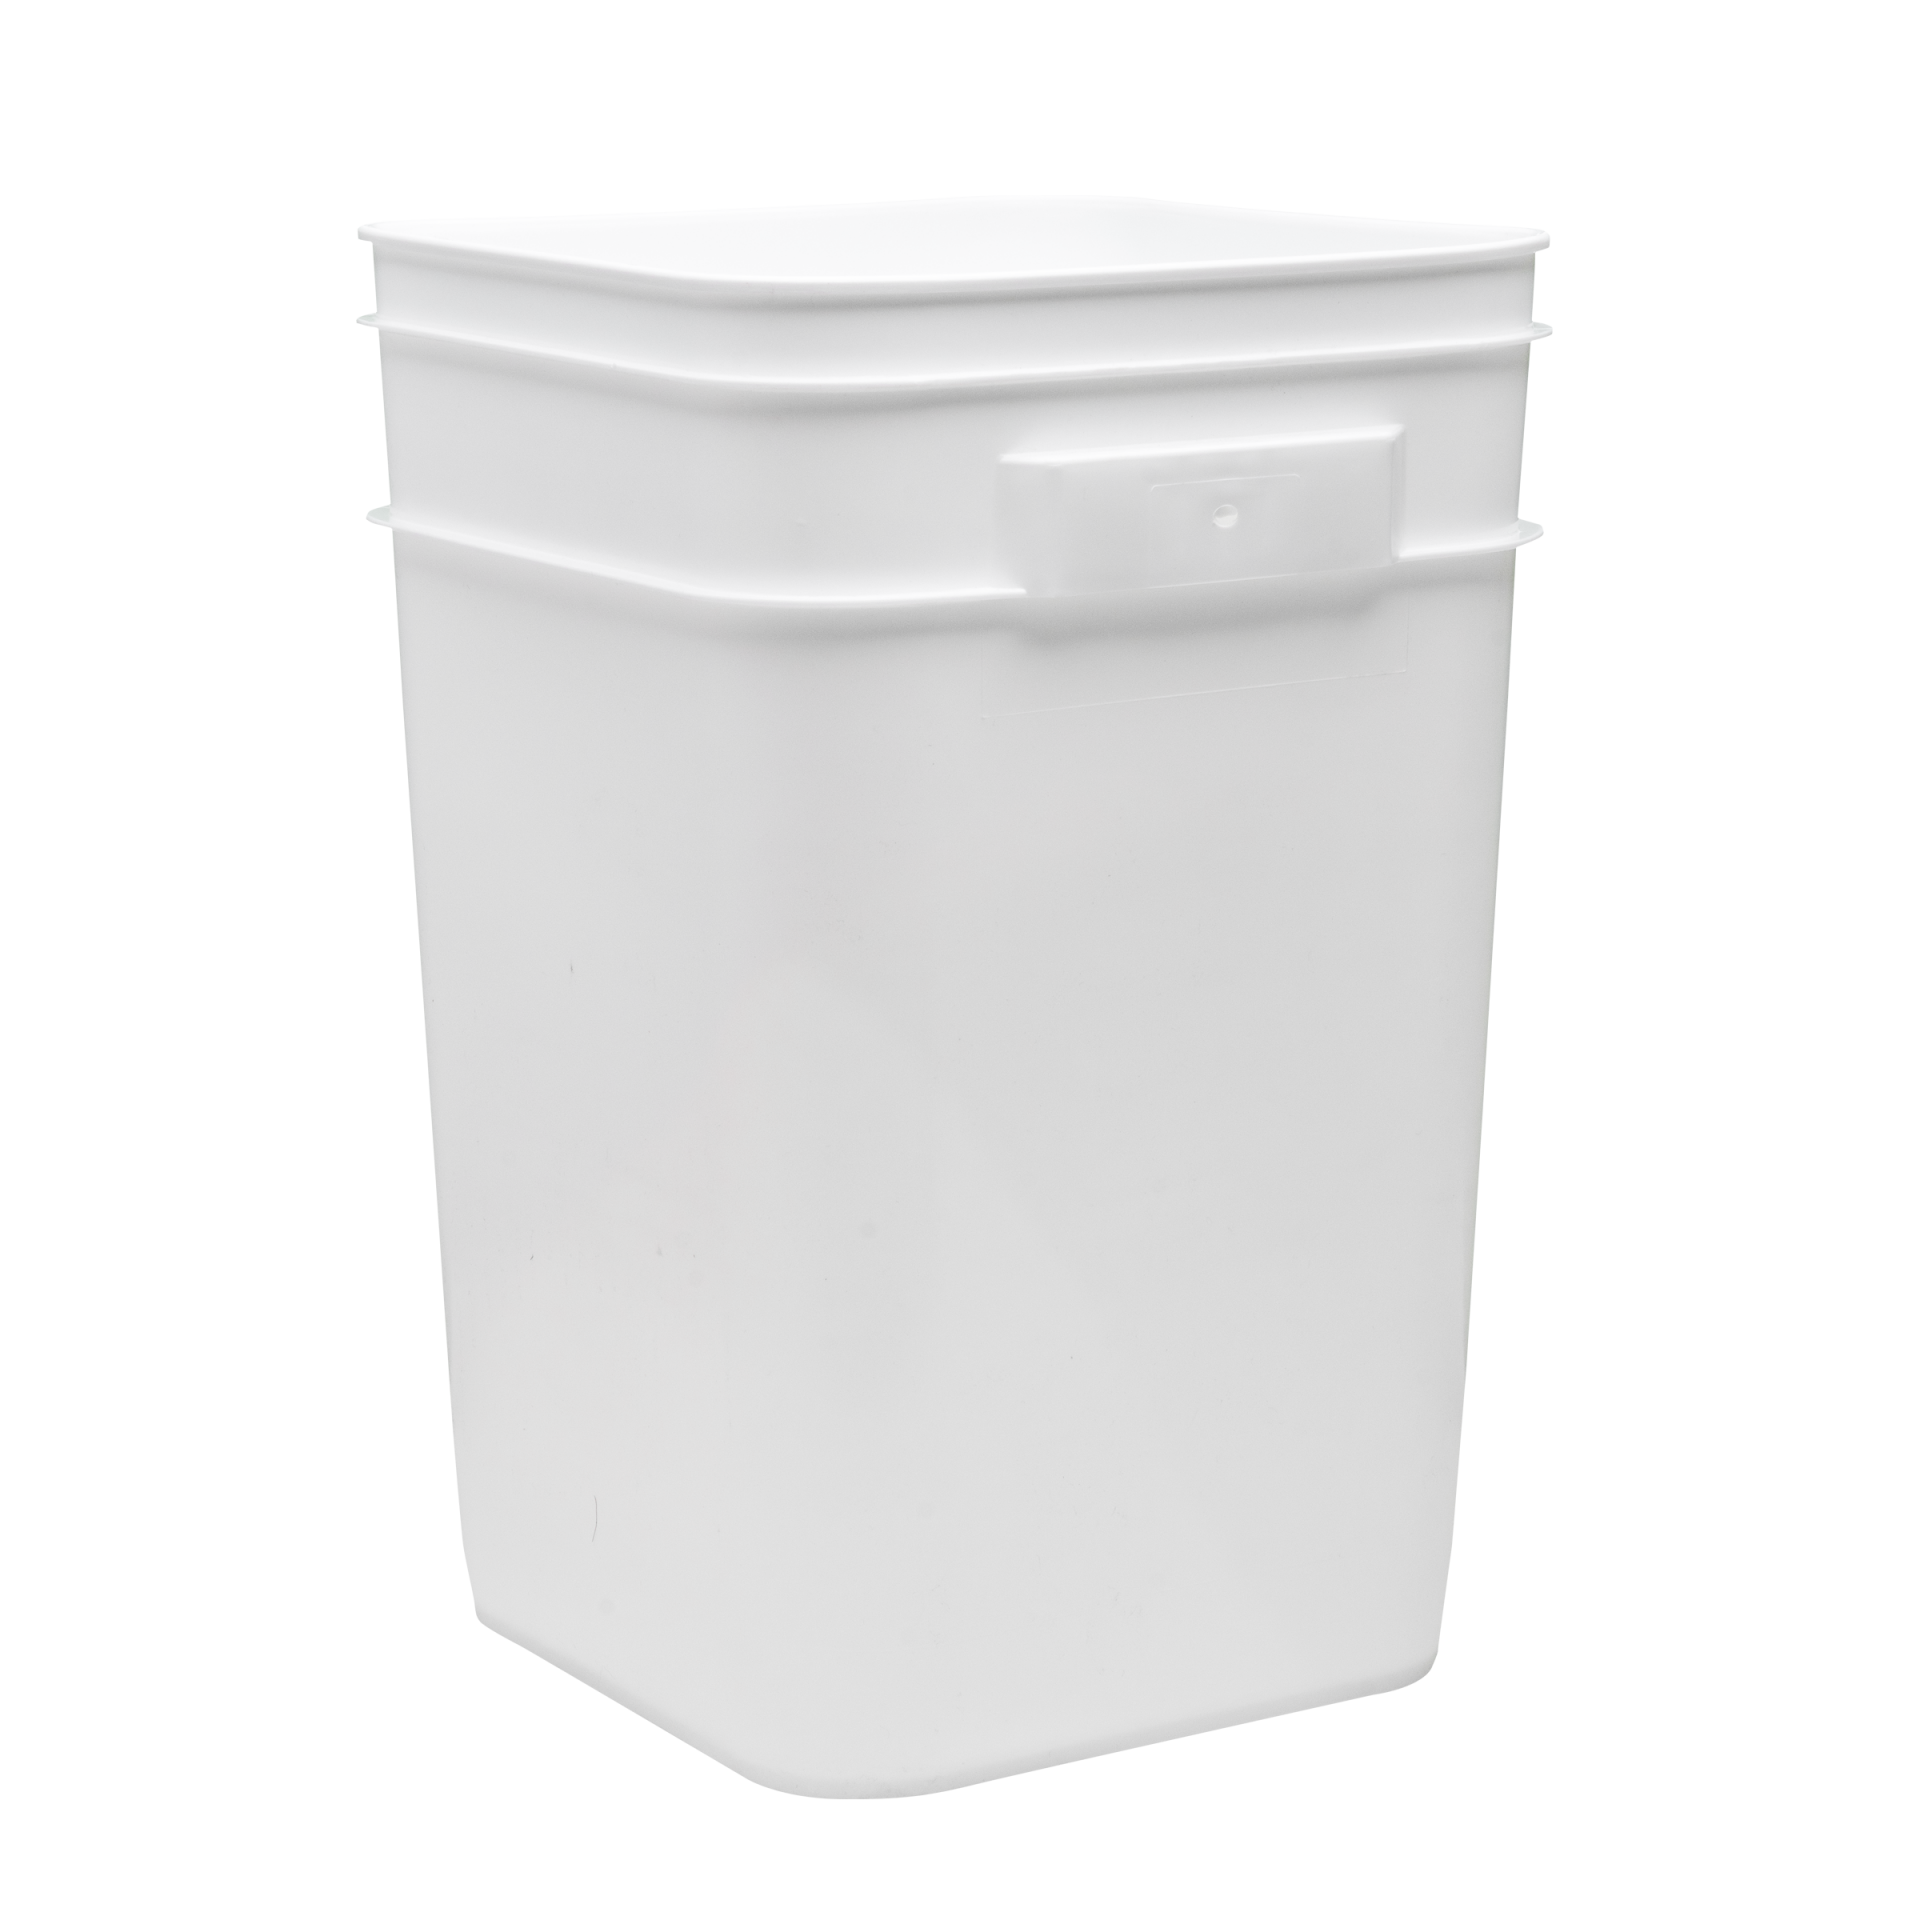 https://www.containersupplycompany.com/wp-content/uploads/2020/03/4-1_4-Gallon-Square-Pail-1920x1920.png